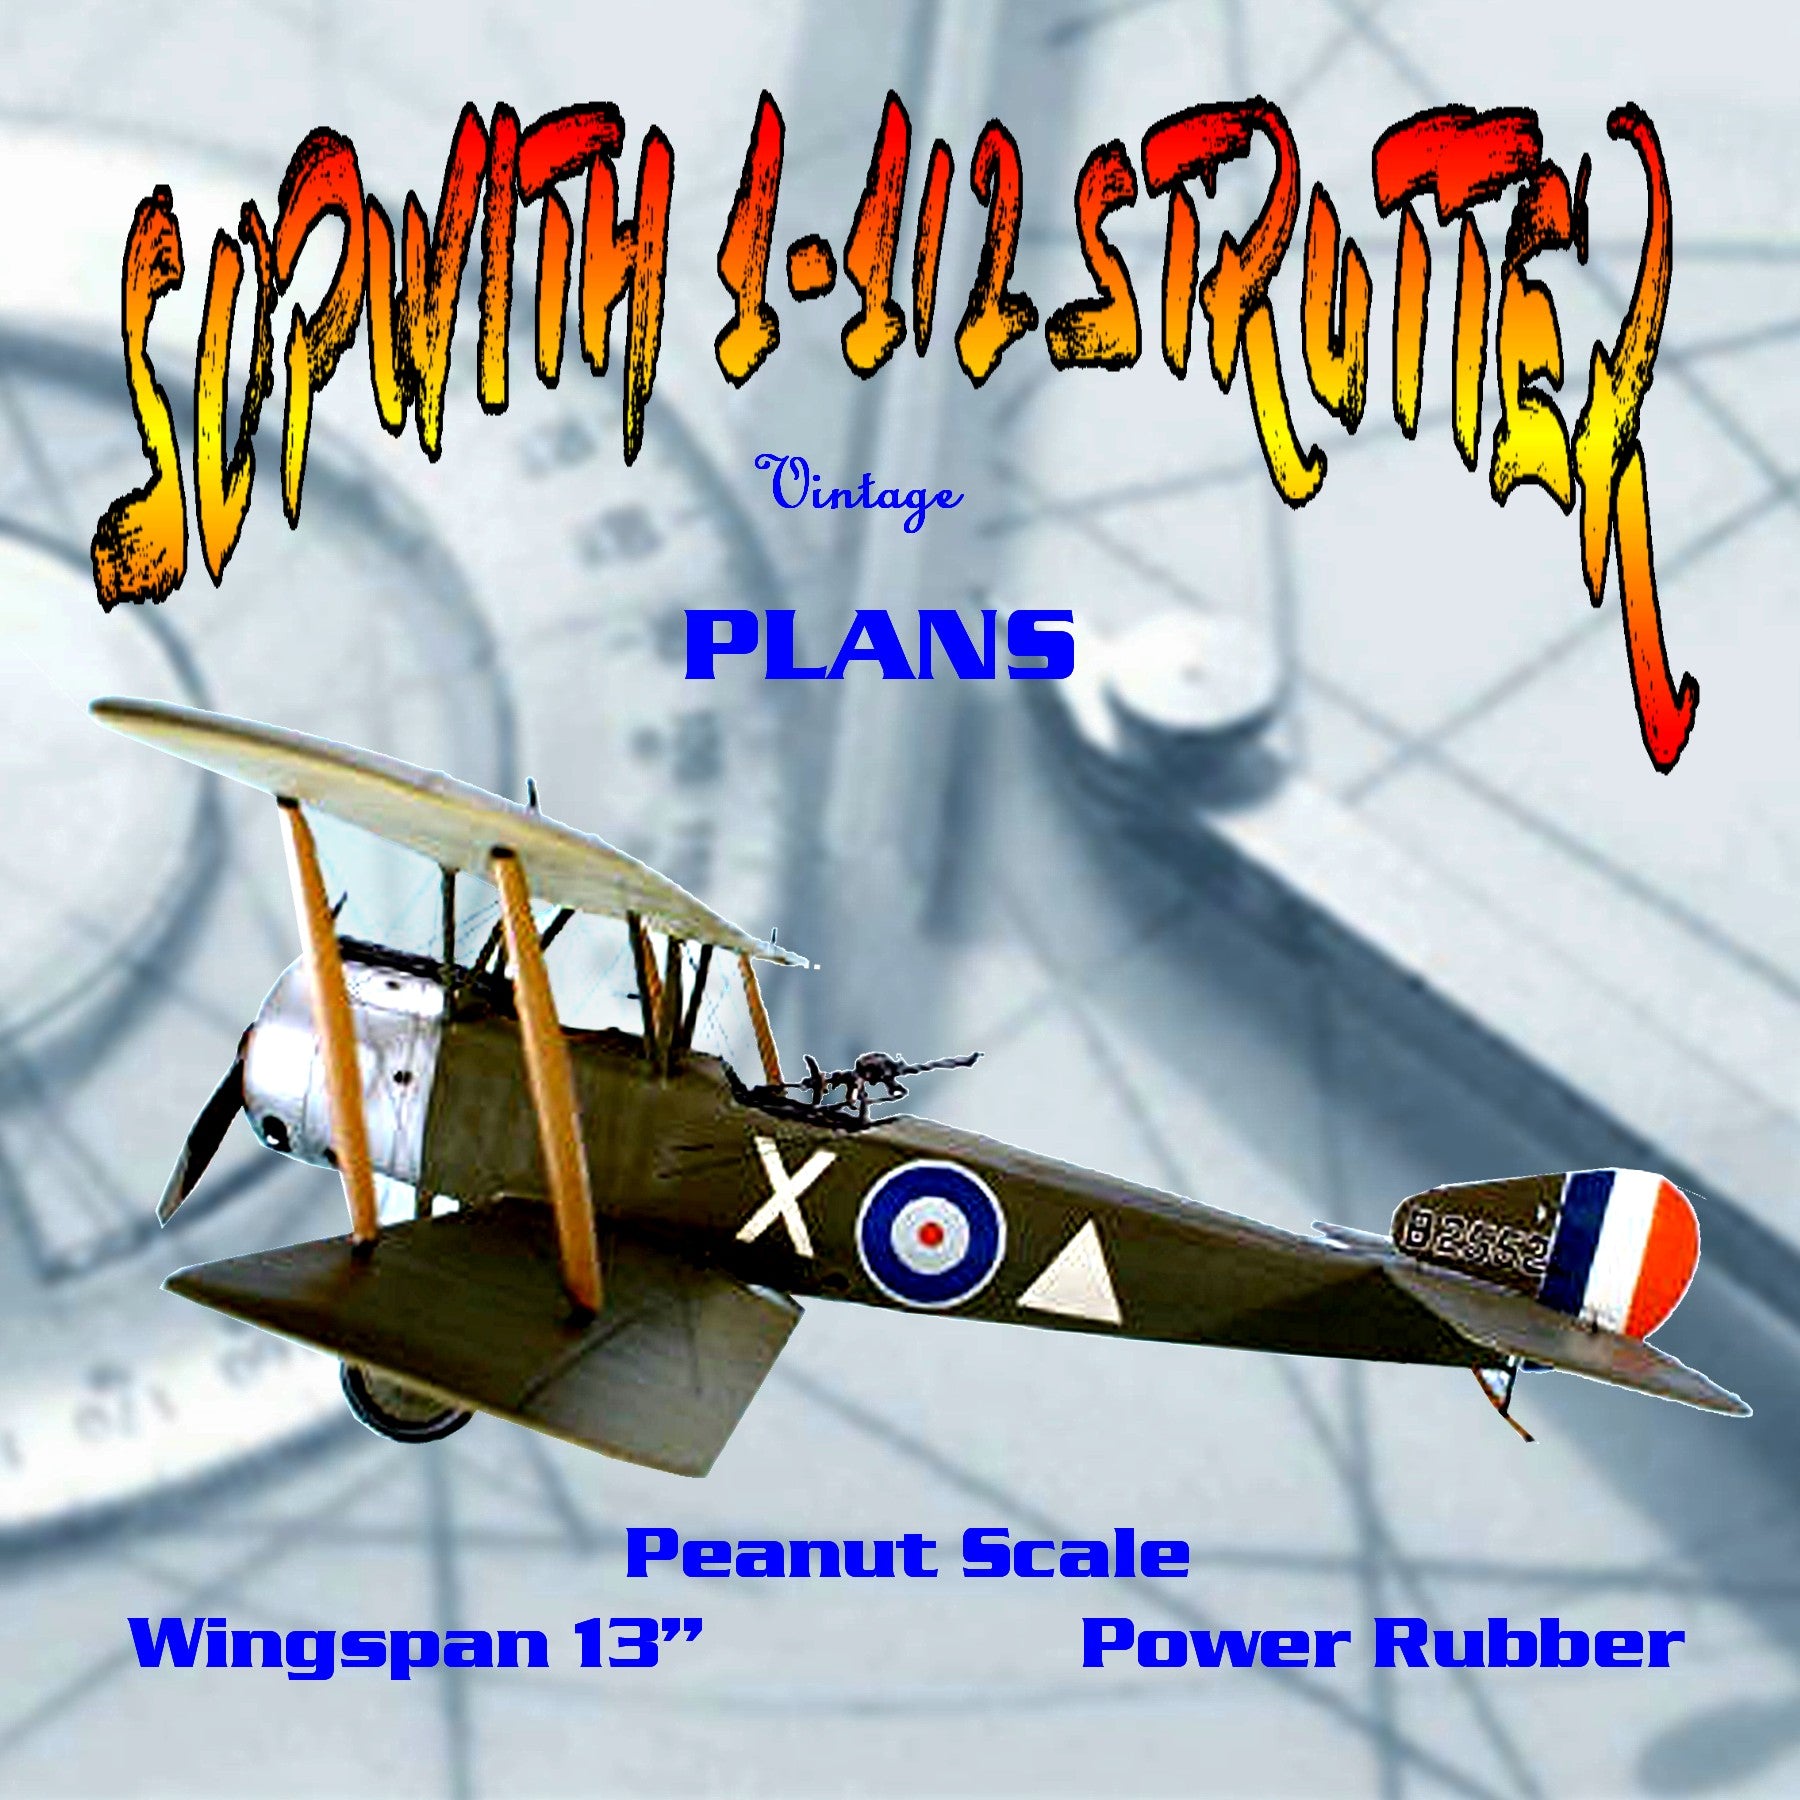 full size printed plans peanut scale "sopwith 1-1/2 strutter" wwi favorite